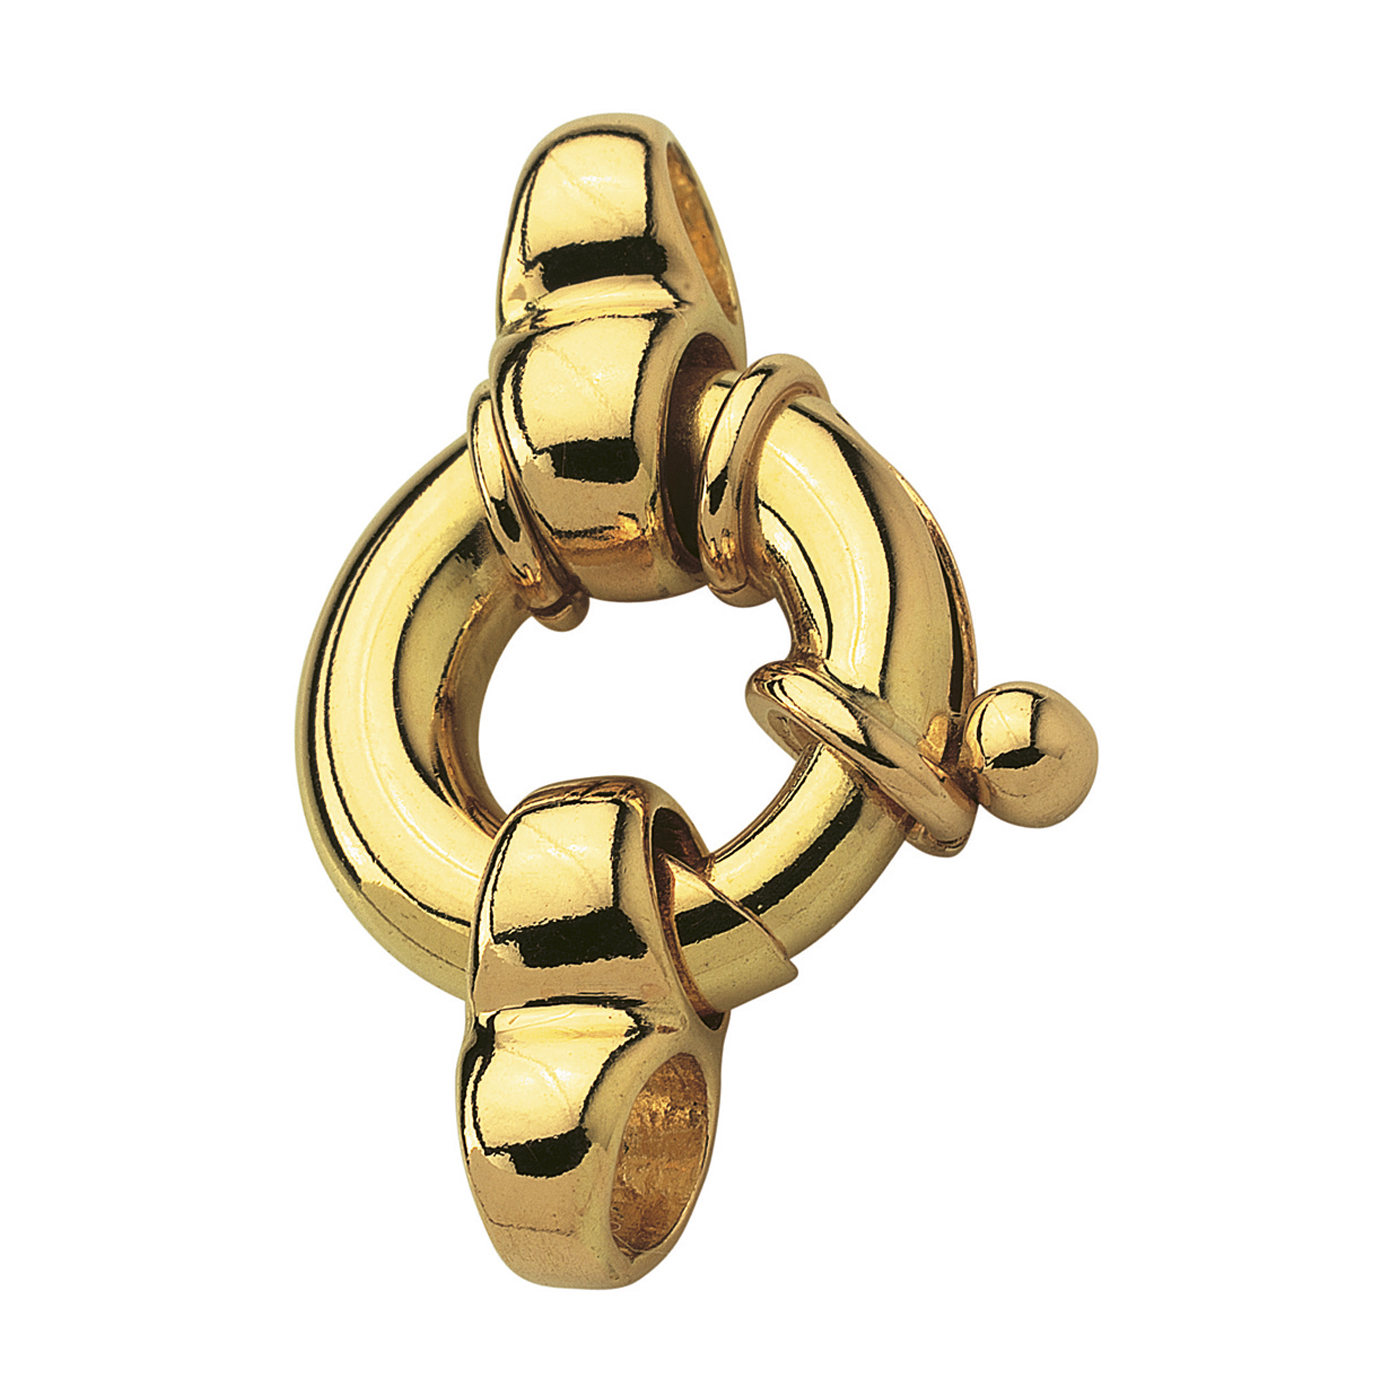 Spring Ring, 750G, ø 13 mm, with Trigger Lugs - 1 piece